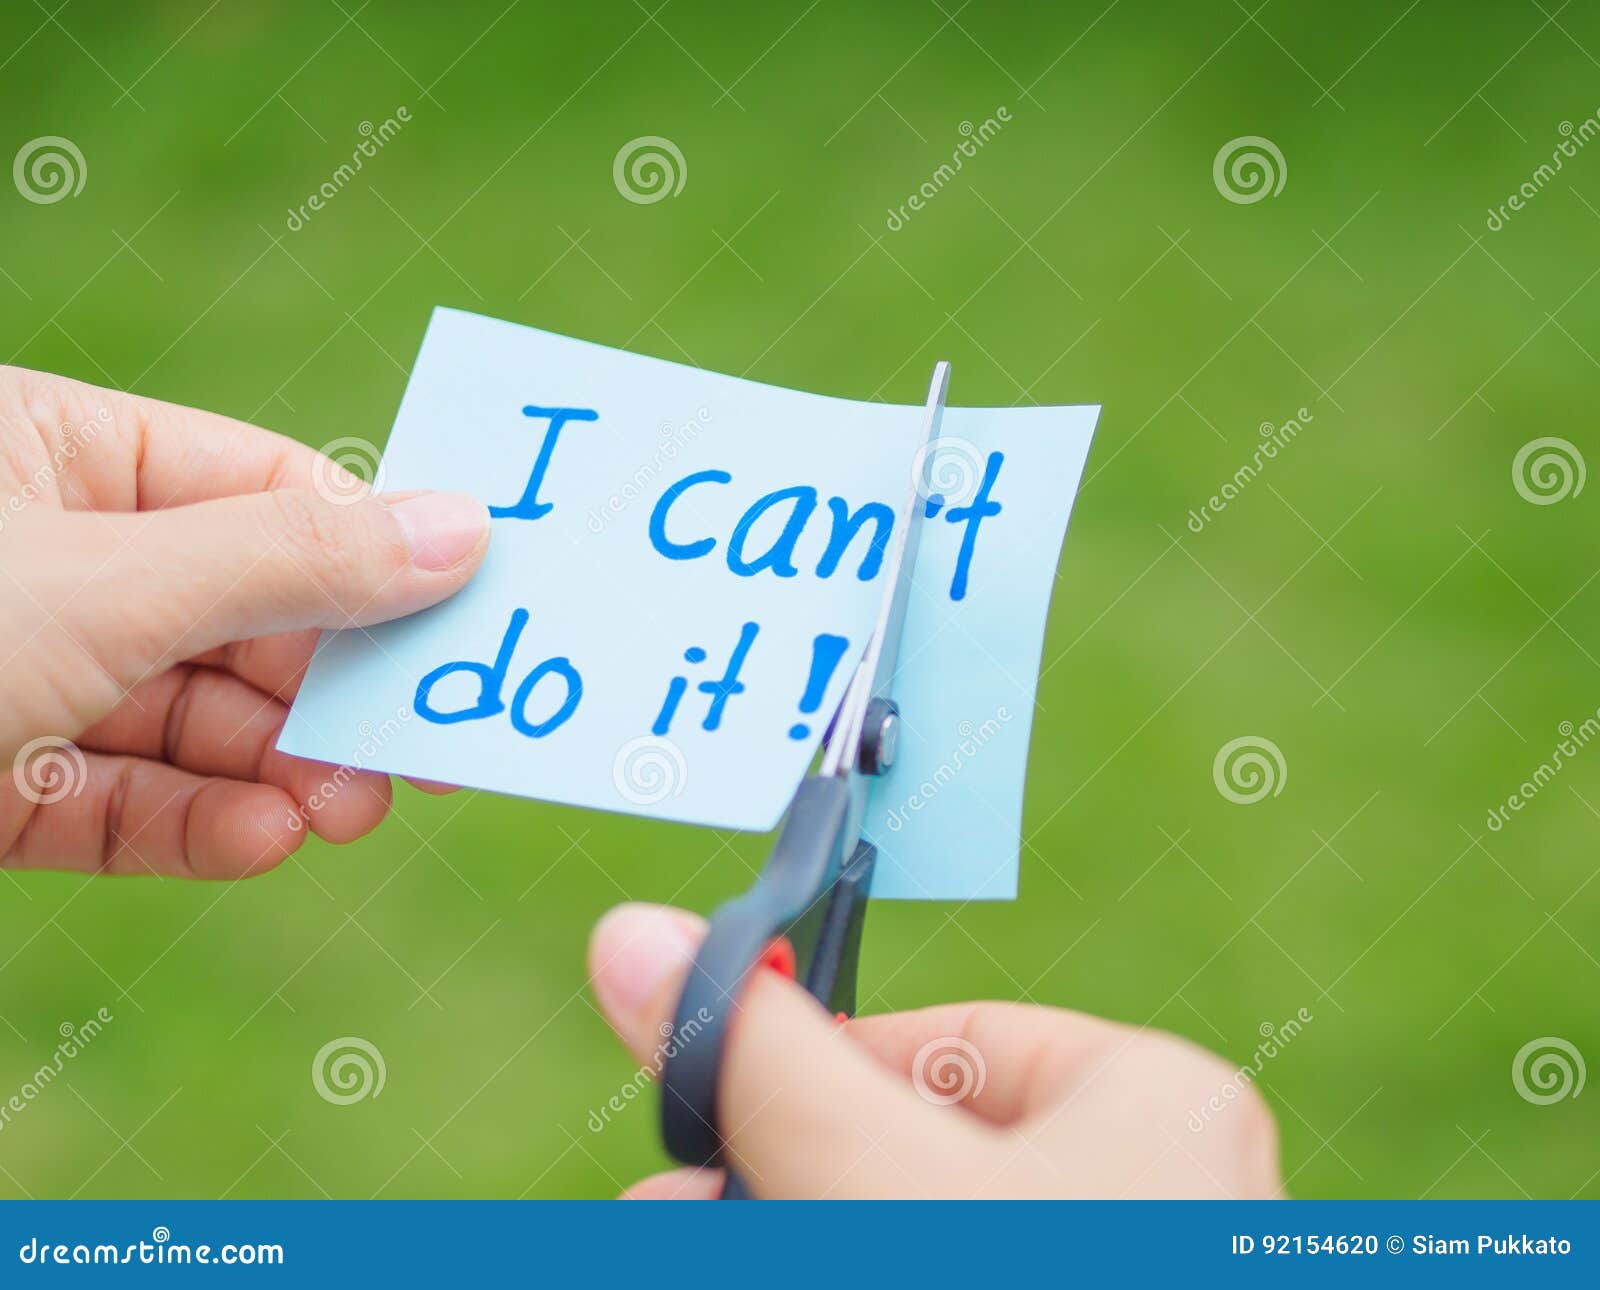 women using scissors to remove the word can`t to read i can do it concept for self belief,